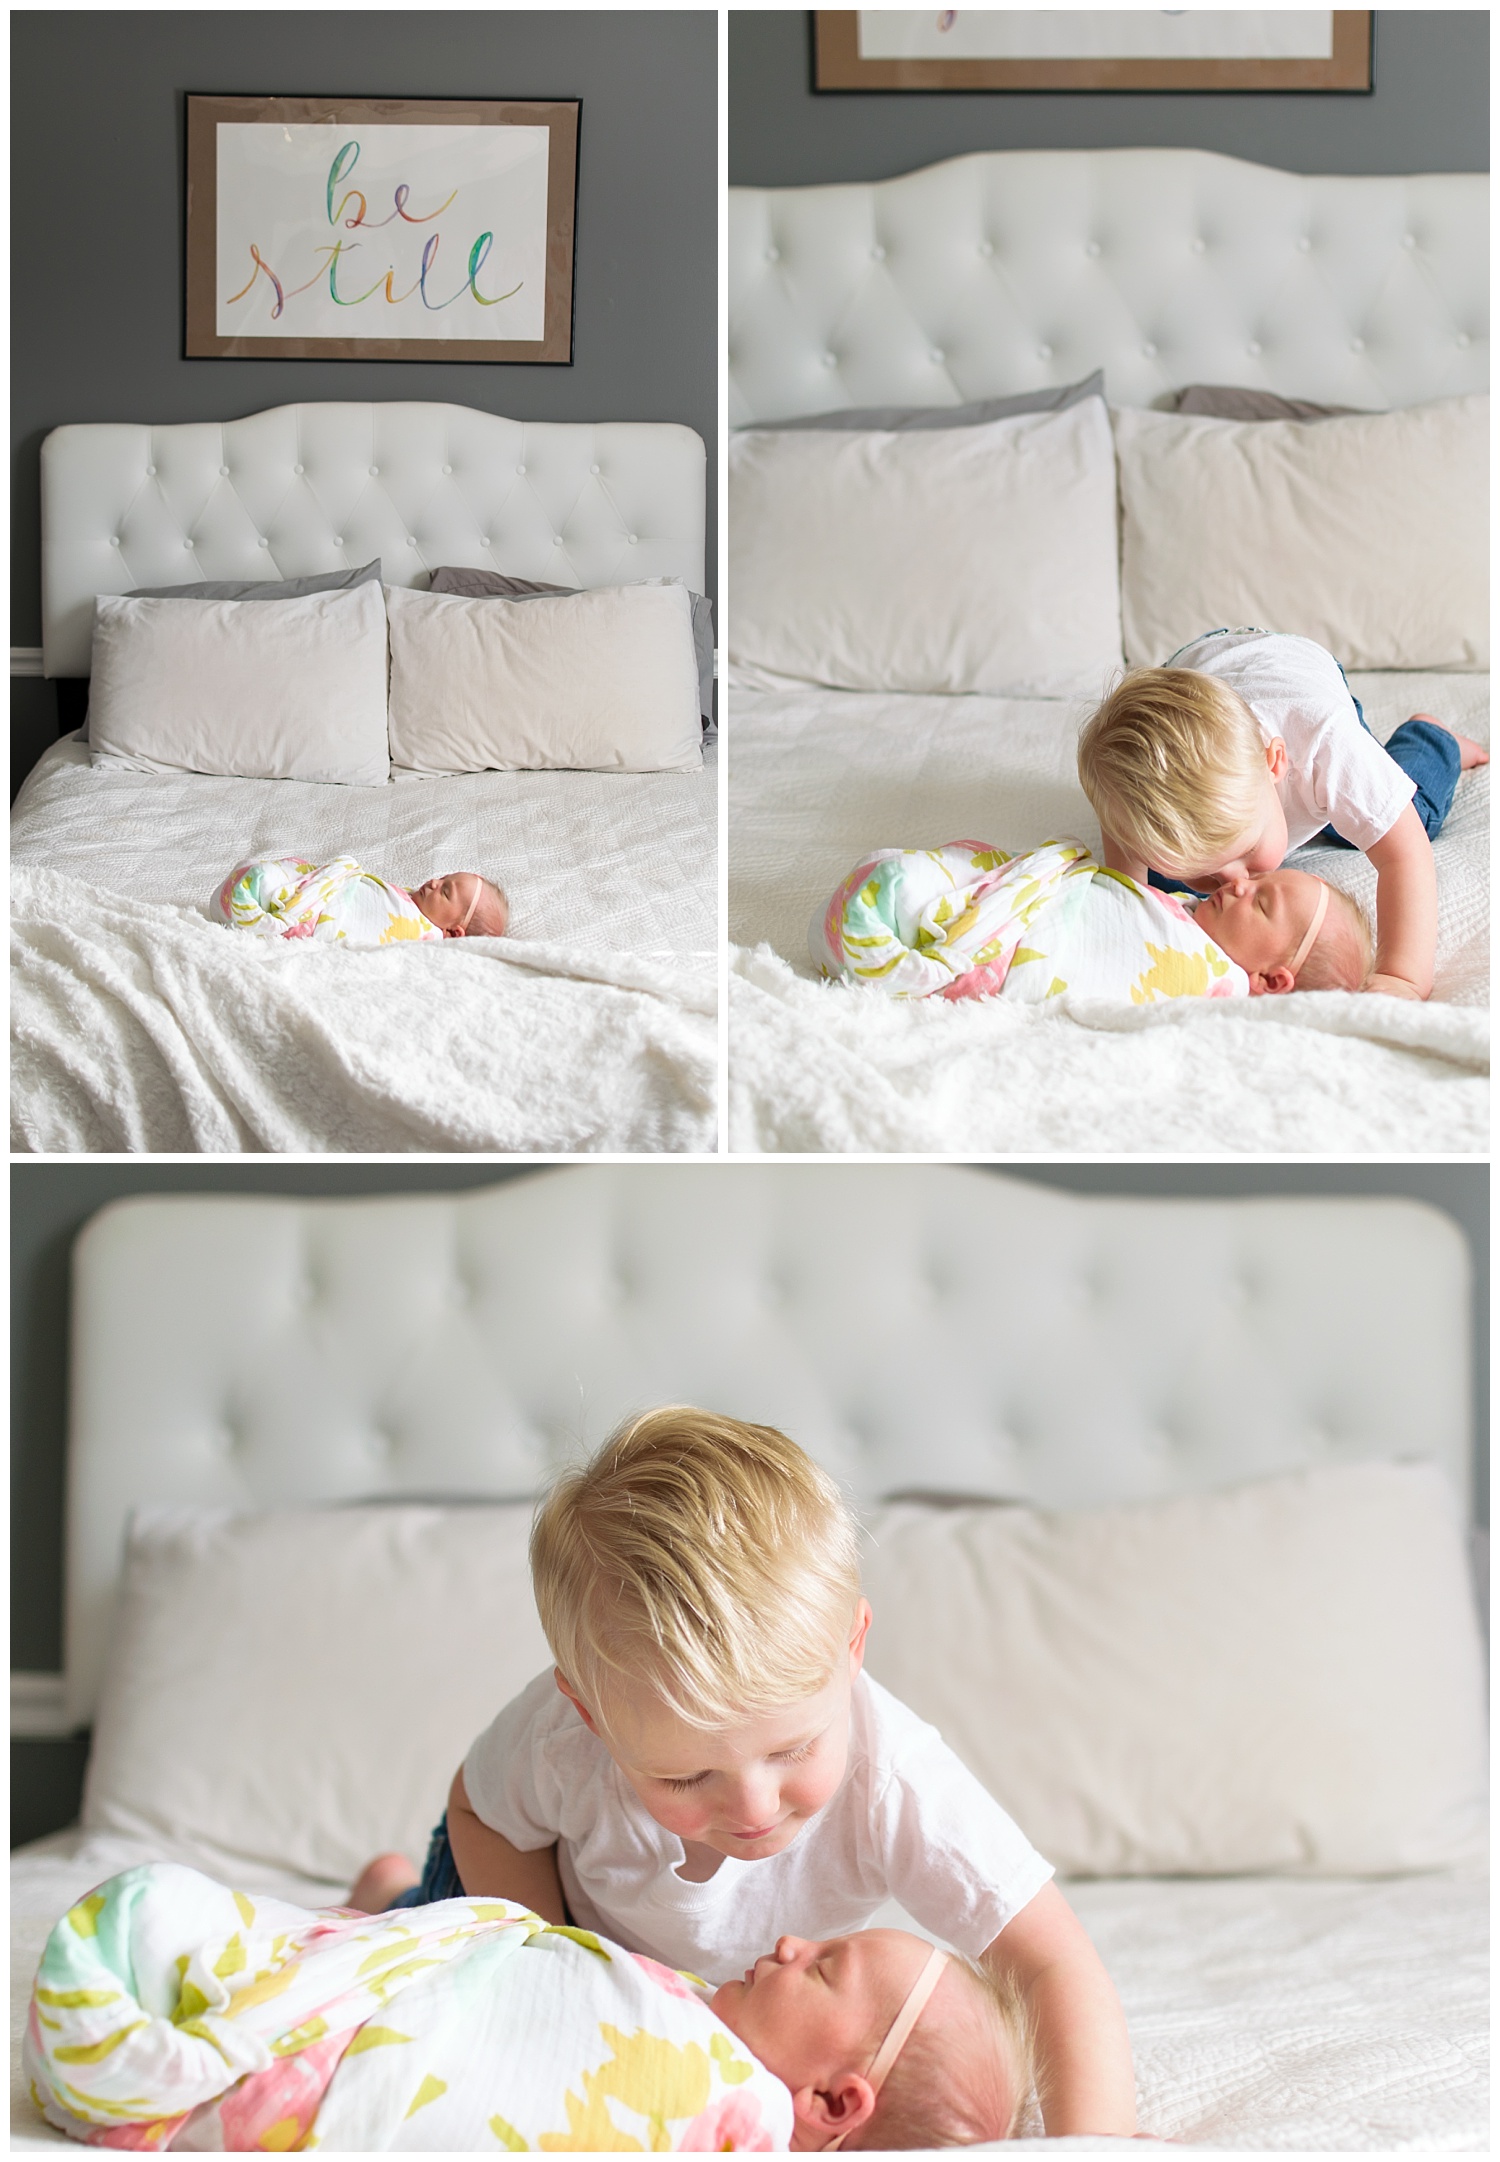 these are images from an in home lifestyle newborn session. the newborn baby girl is laying on the bed in a swaddle and her big brother is kissing her on the cheek.